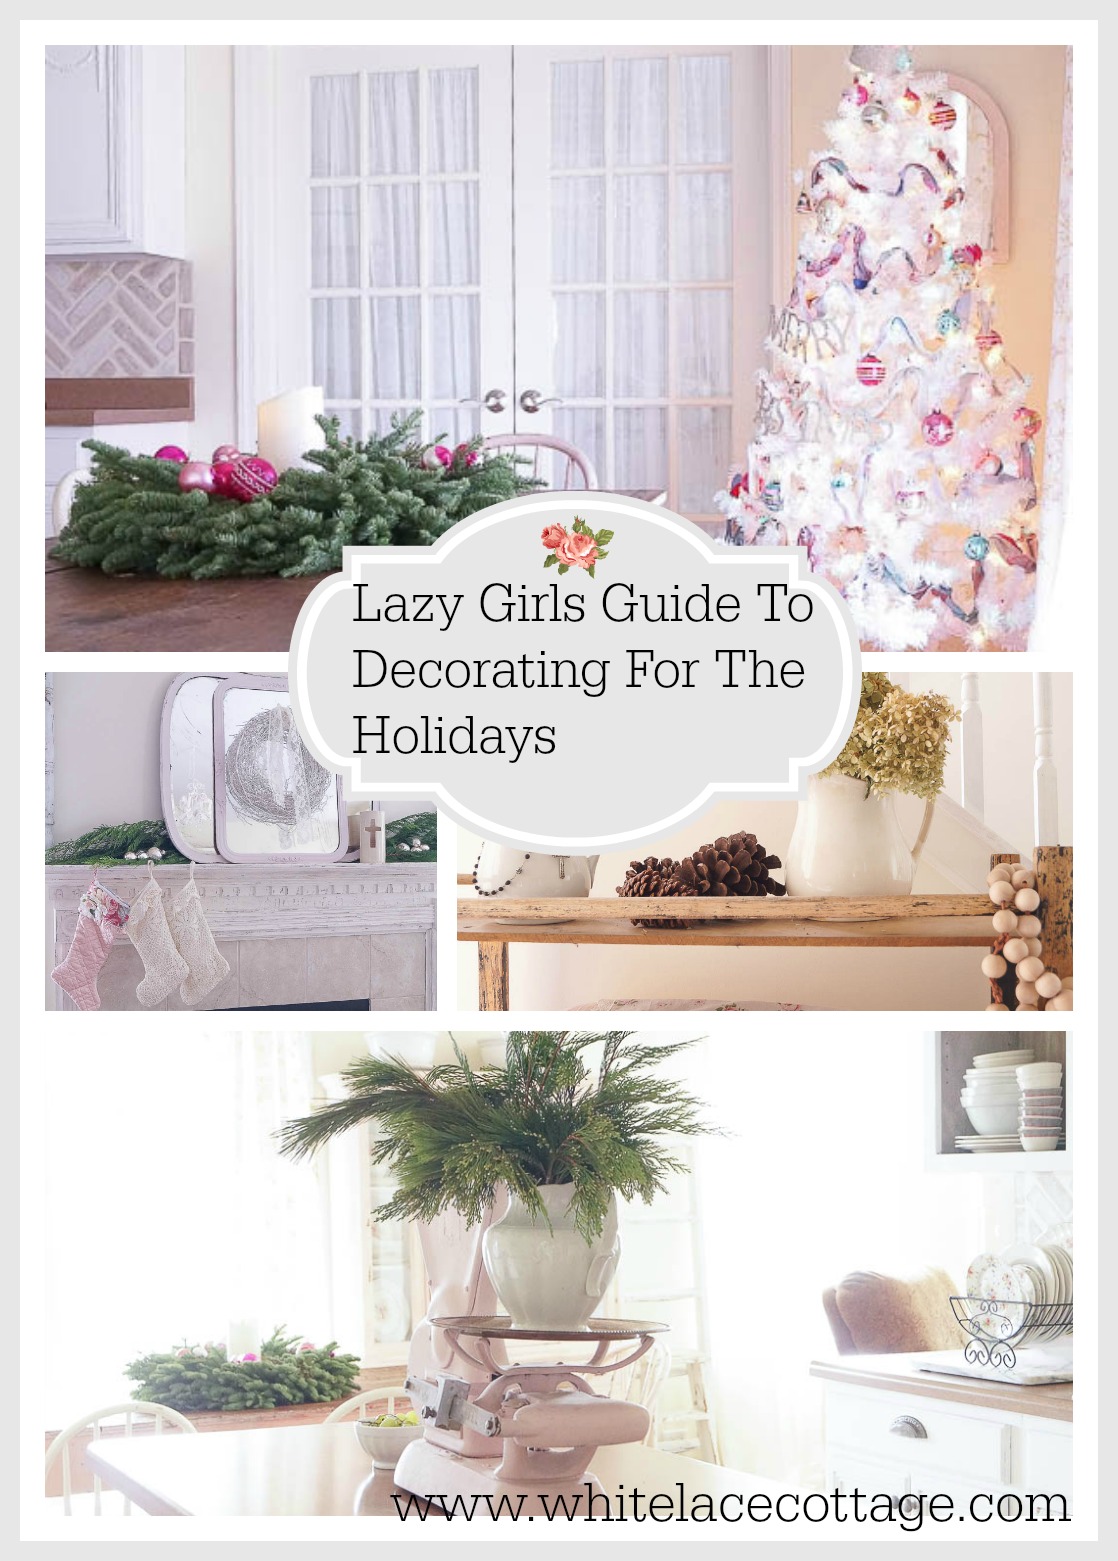 Lazy girls guide to decorating for the holidays